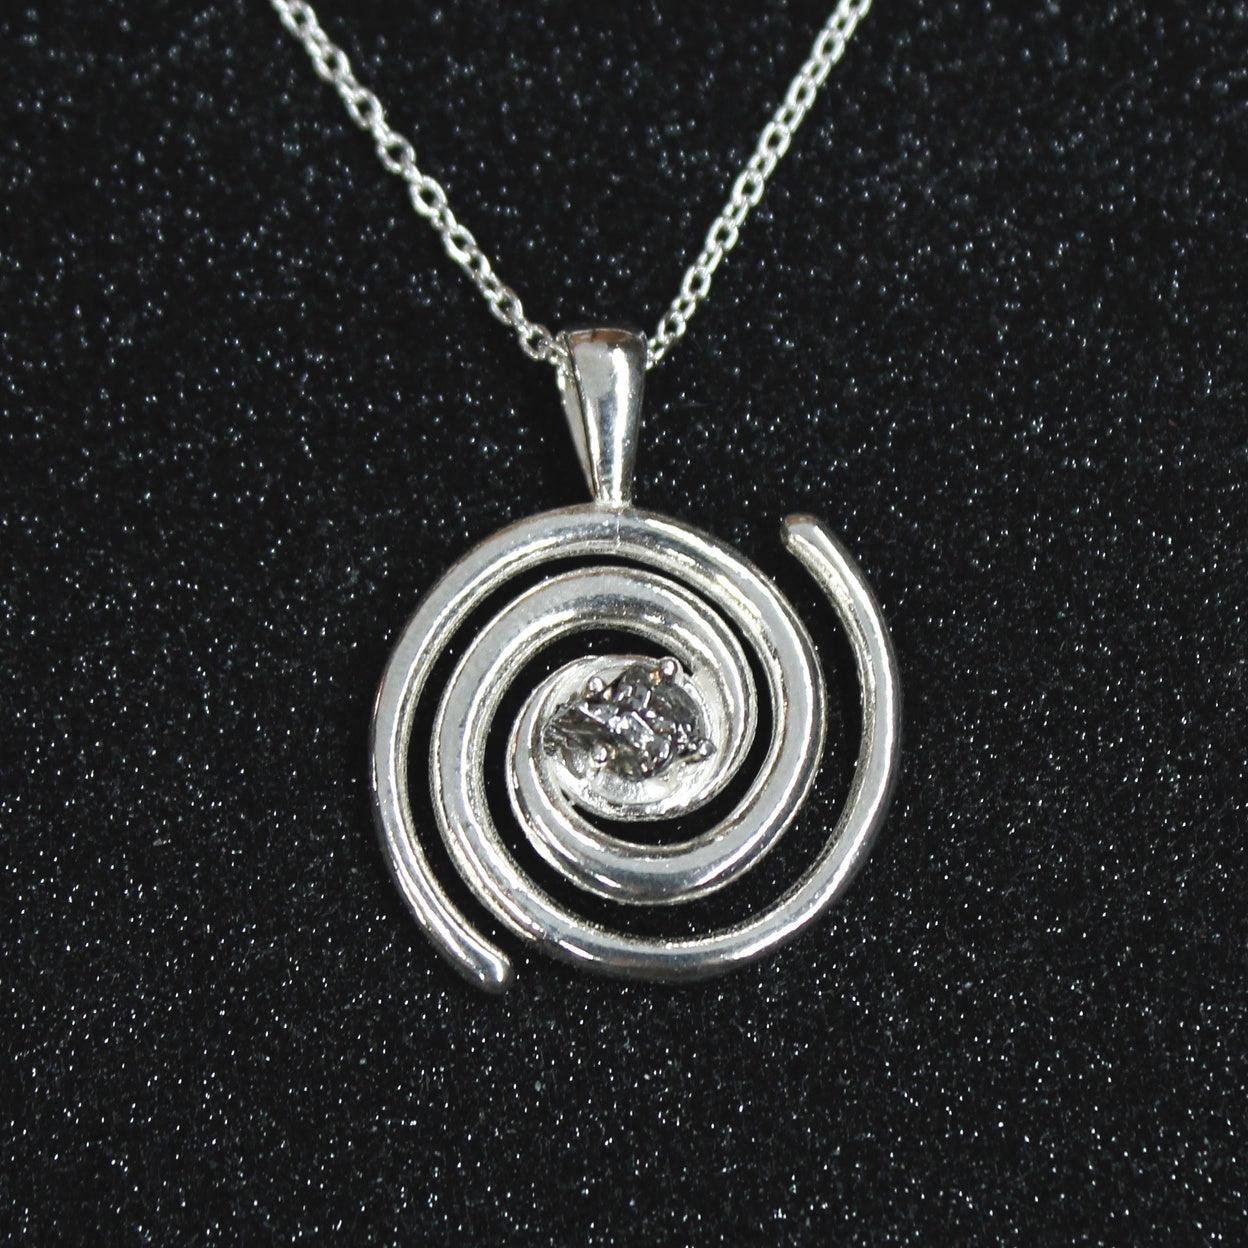 Spiral galaxy necklace with a genuine Campo del Celio meteorite in the center! A solid sterling silver spiral galaxy necklace is the perfect space gift.